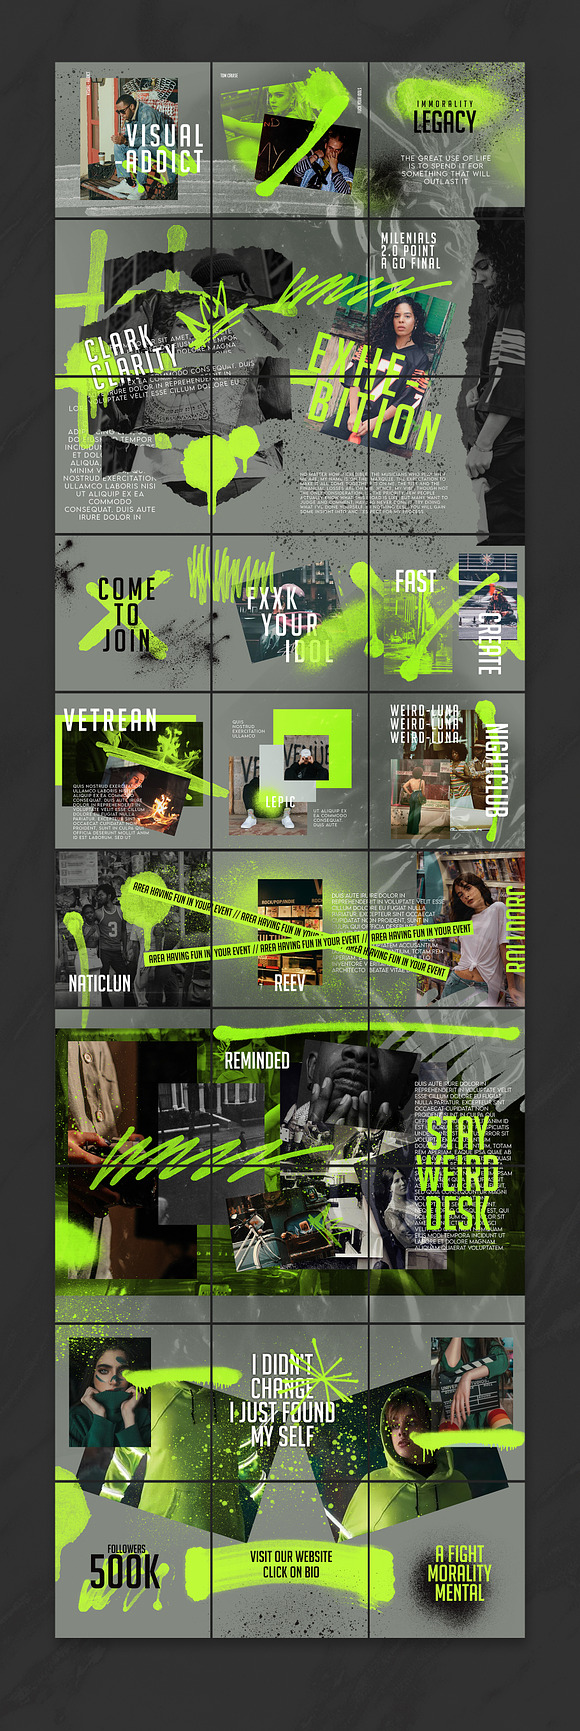 Vandalsm Puzzle Instagram Feed in Instagram Templates - product preview 1